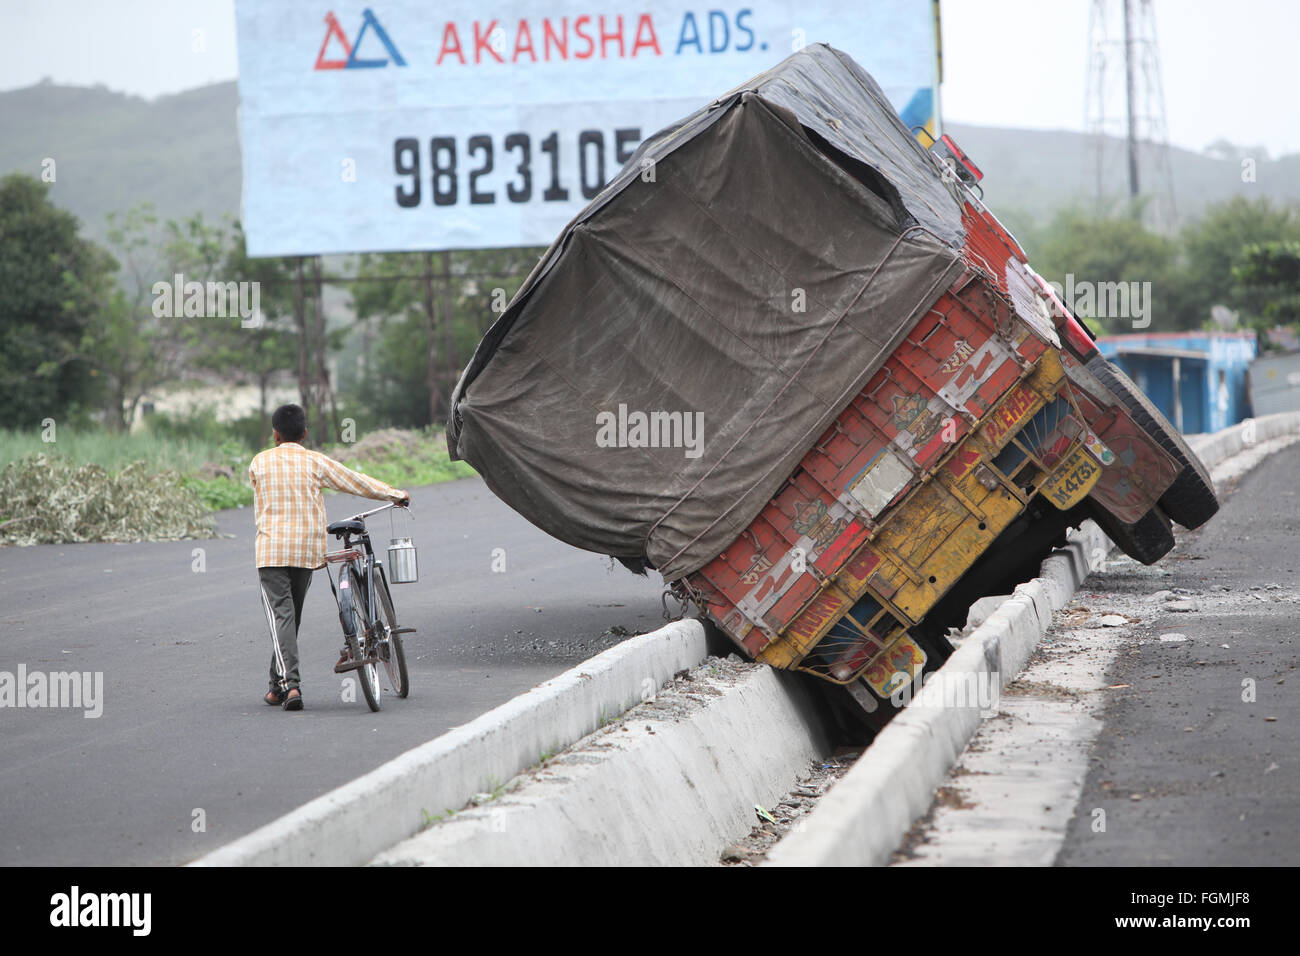 Pune, India - June 27, 2015: An truck that went out of control on an Indian highway and fell in storm drainage canal. Stock Photo